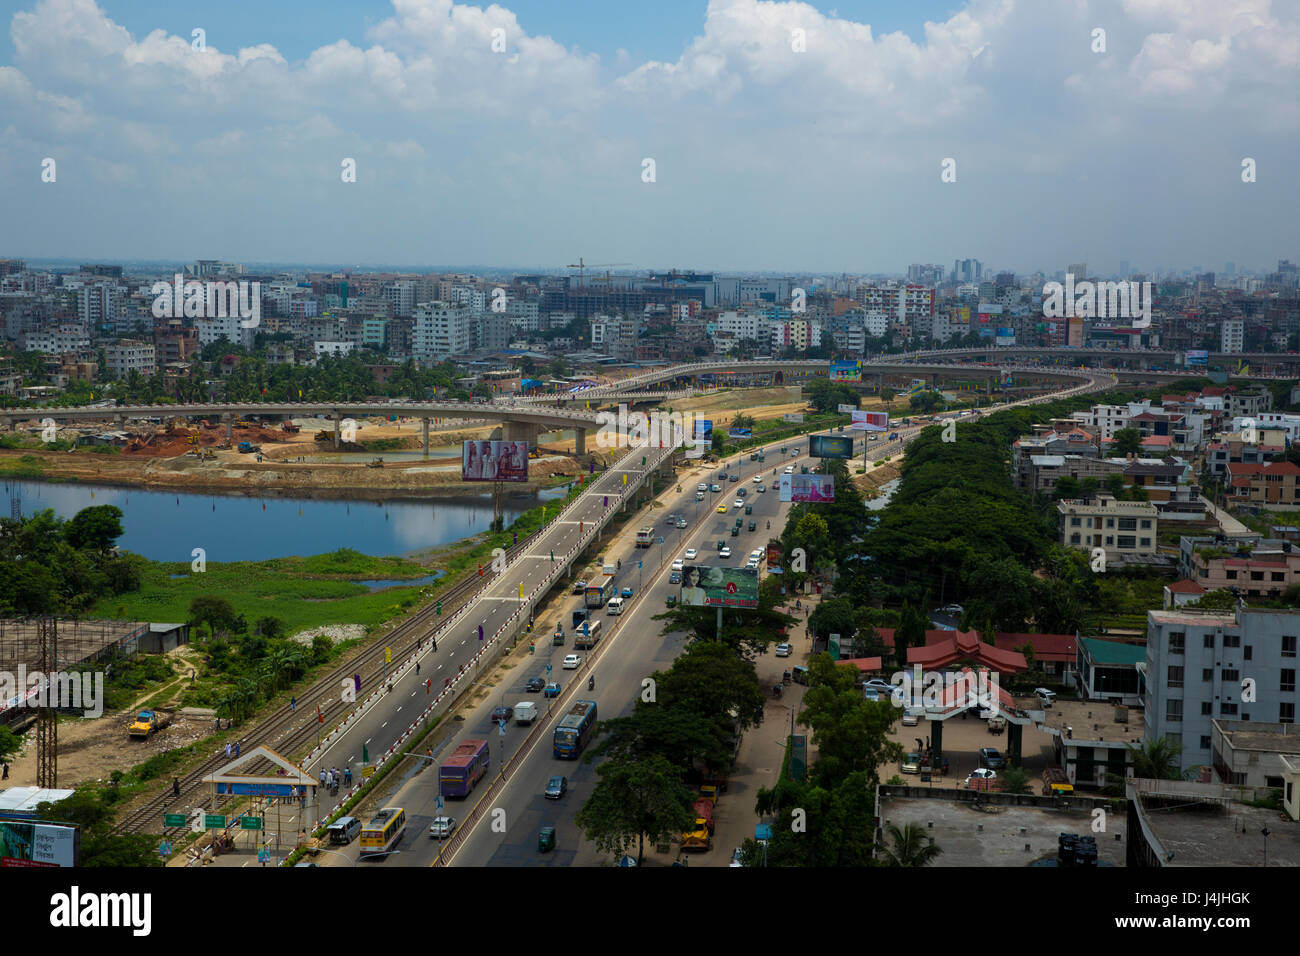 The 3.1km long, one-way Kuril flyover in the capital, inaugurated on 4th August 2013. Dhaka, Bangladesh. Stock Photo